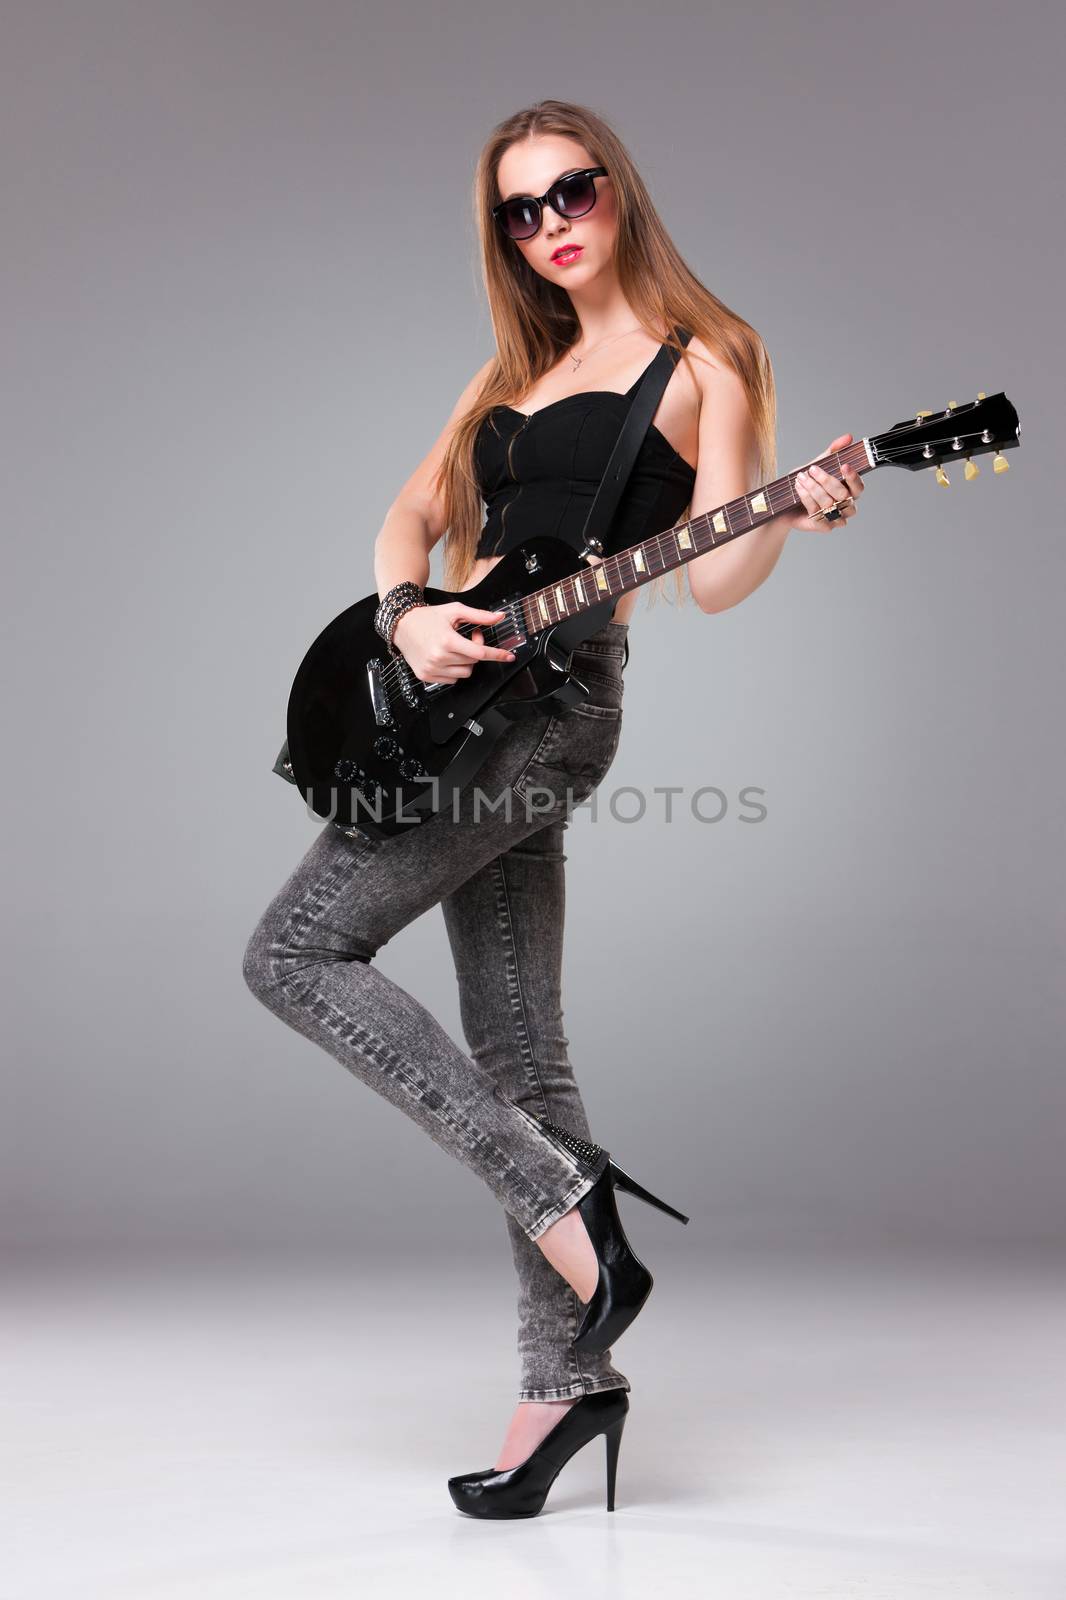 Beautiful girl with sunglasses playing guitar in rock style on a gray background